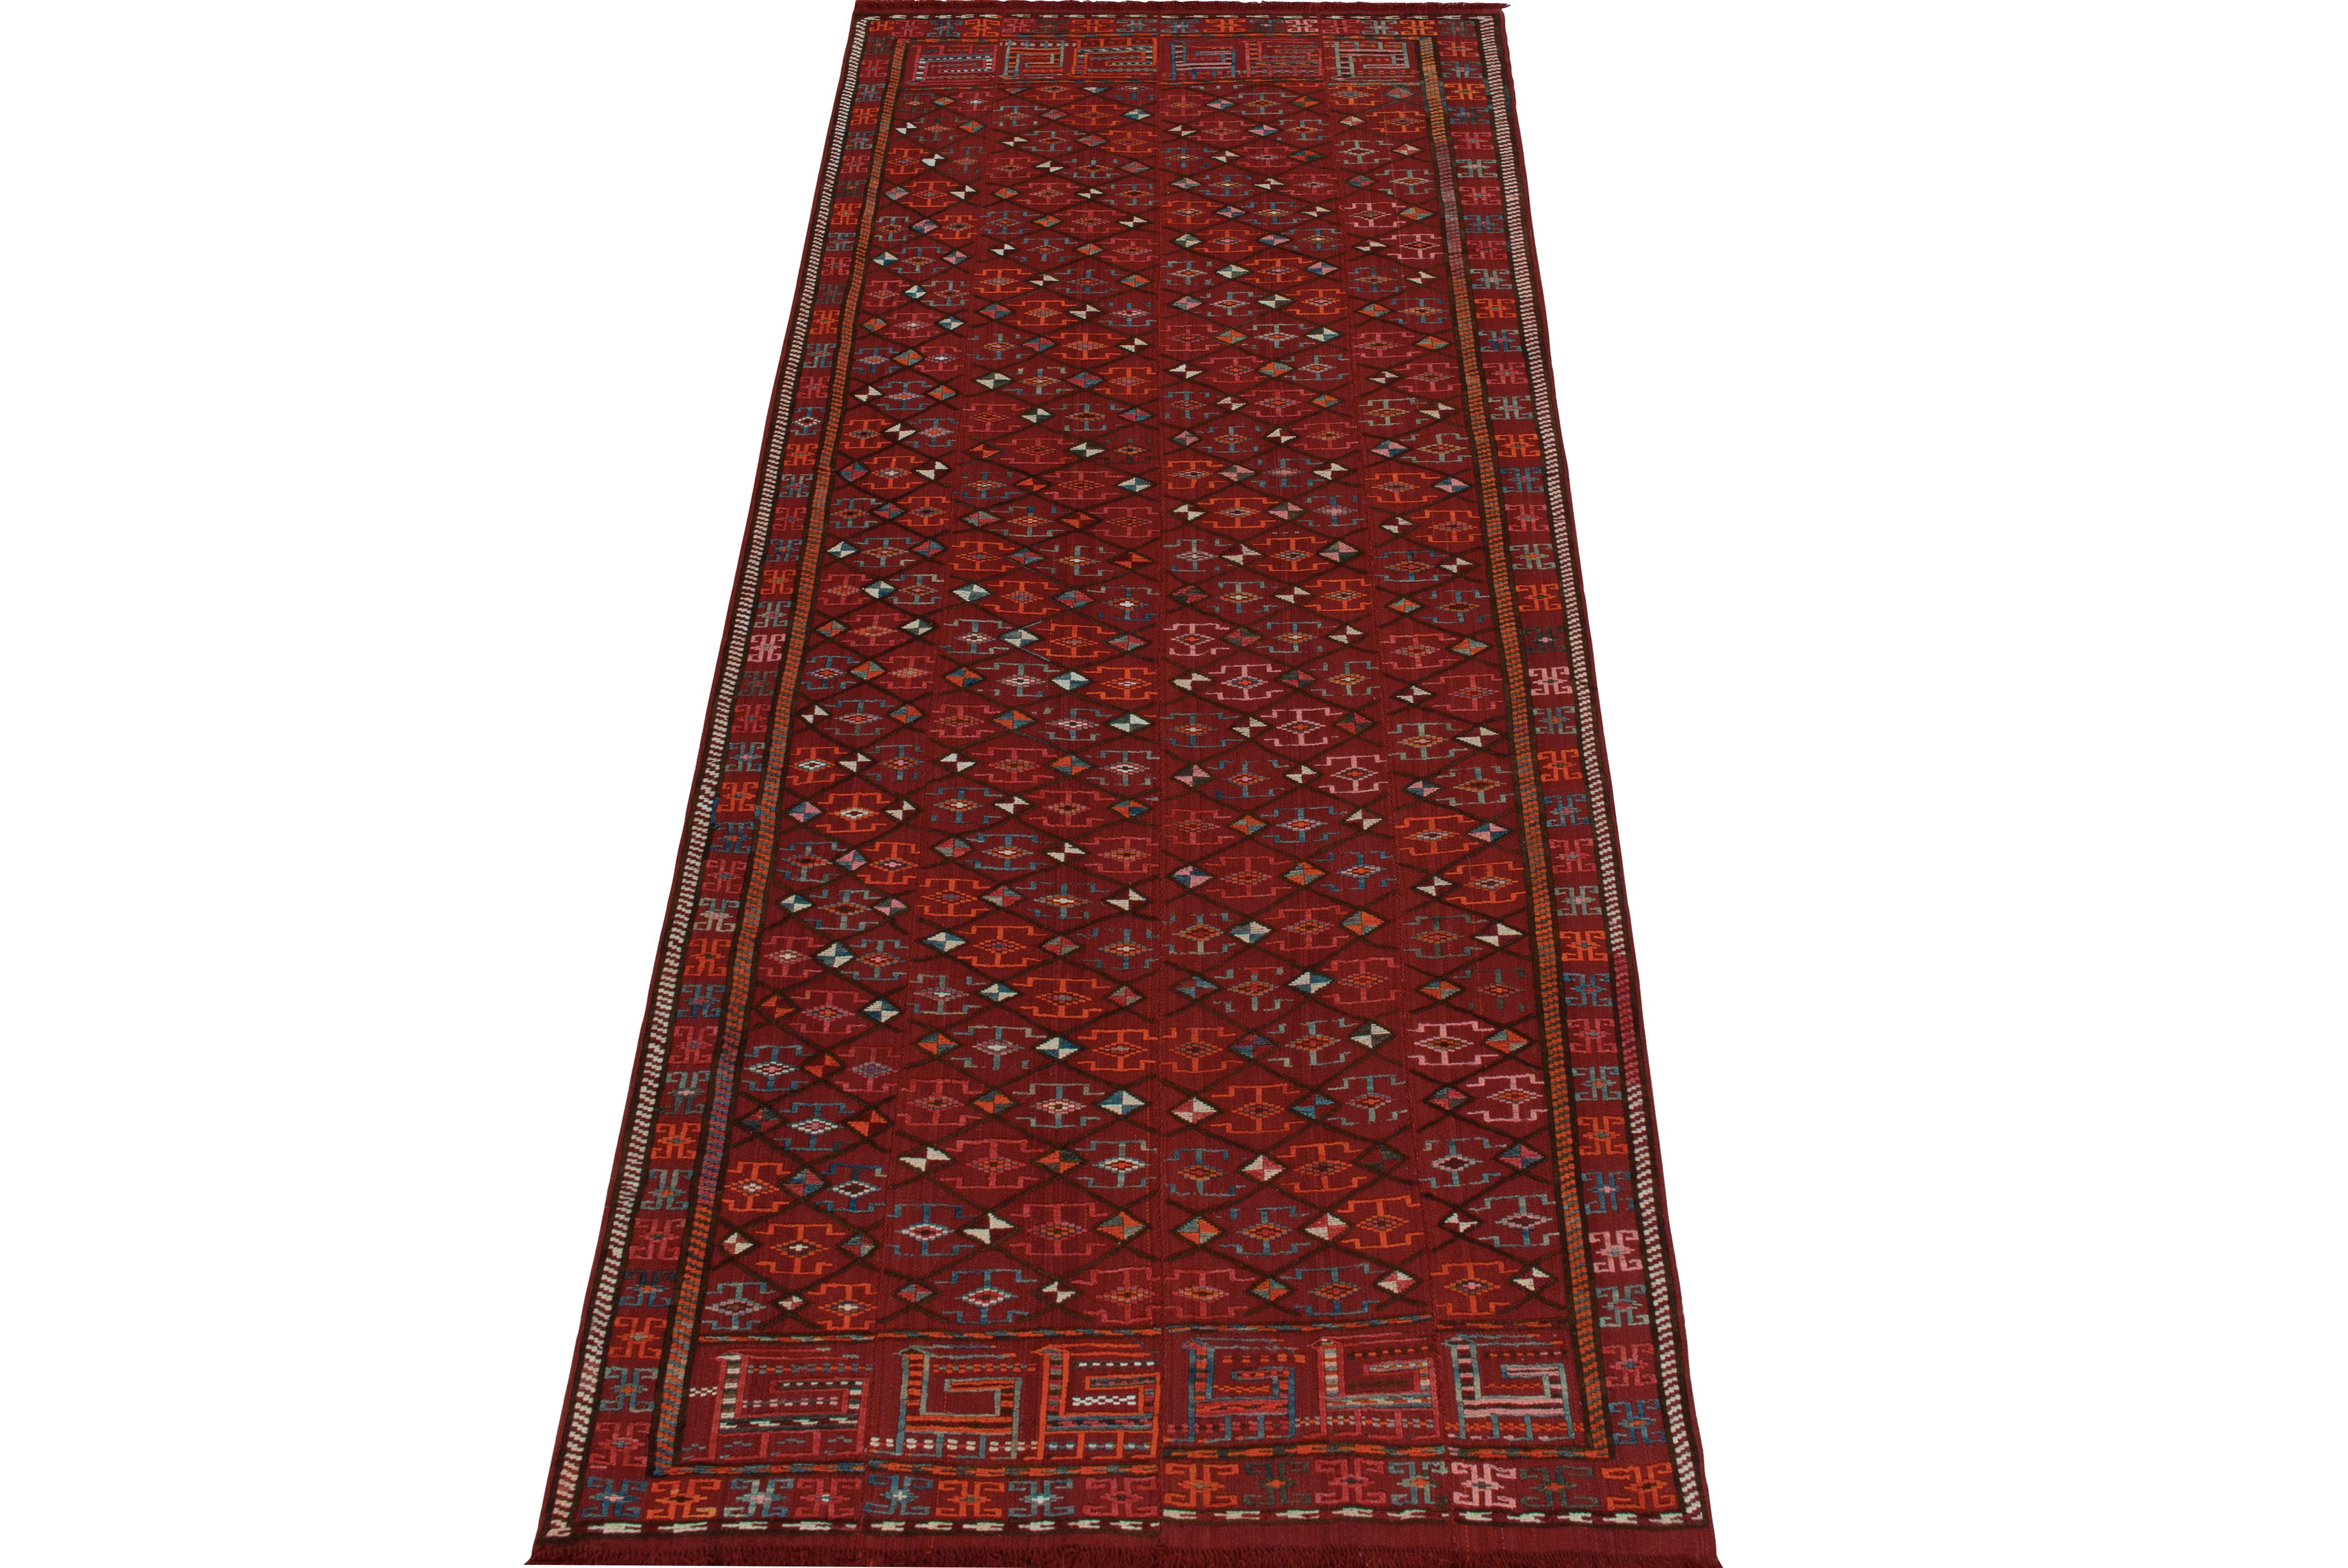 Handwoven in wool from Persia originating between 1950-1960, a 4x8 vintage Verneh kilim enjoying richness and subtle textural elements in play with repetition. The masterpiece relishes an alluring colourway with luxe red playing with deep & blue